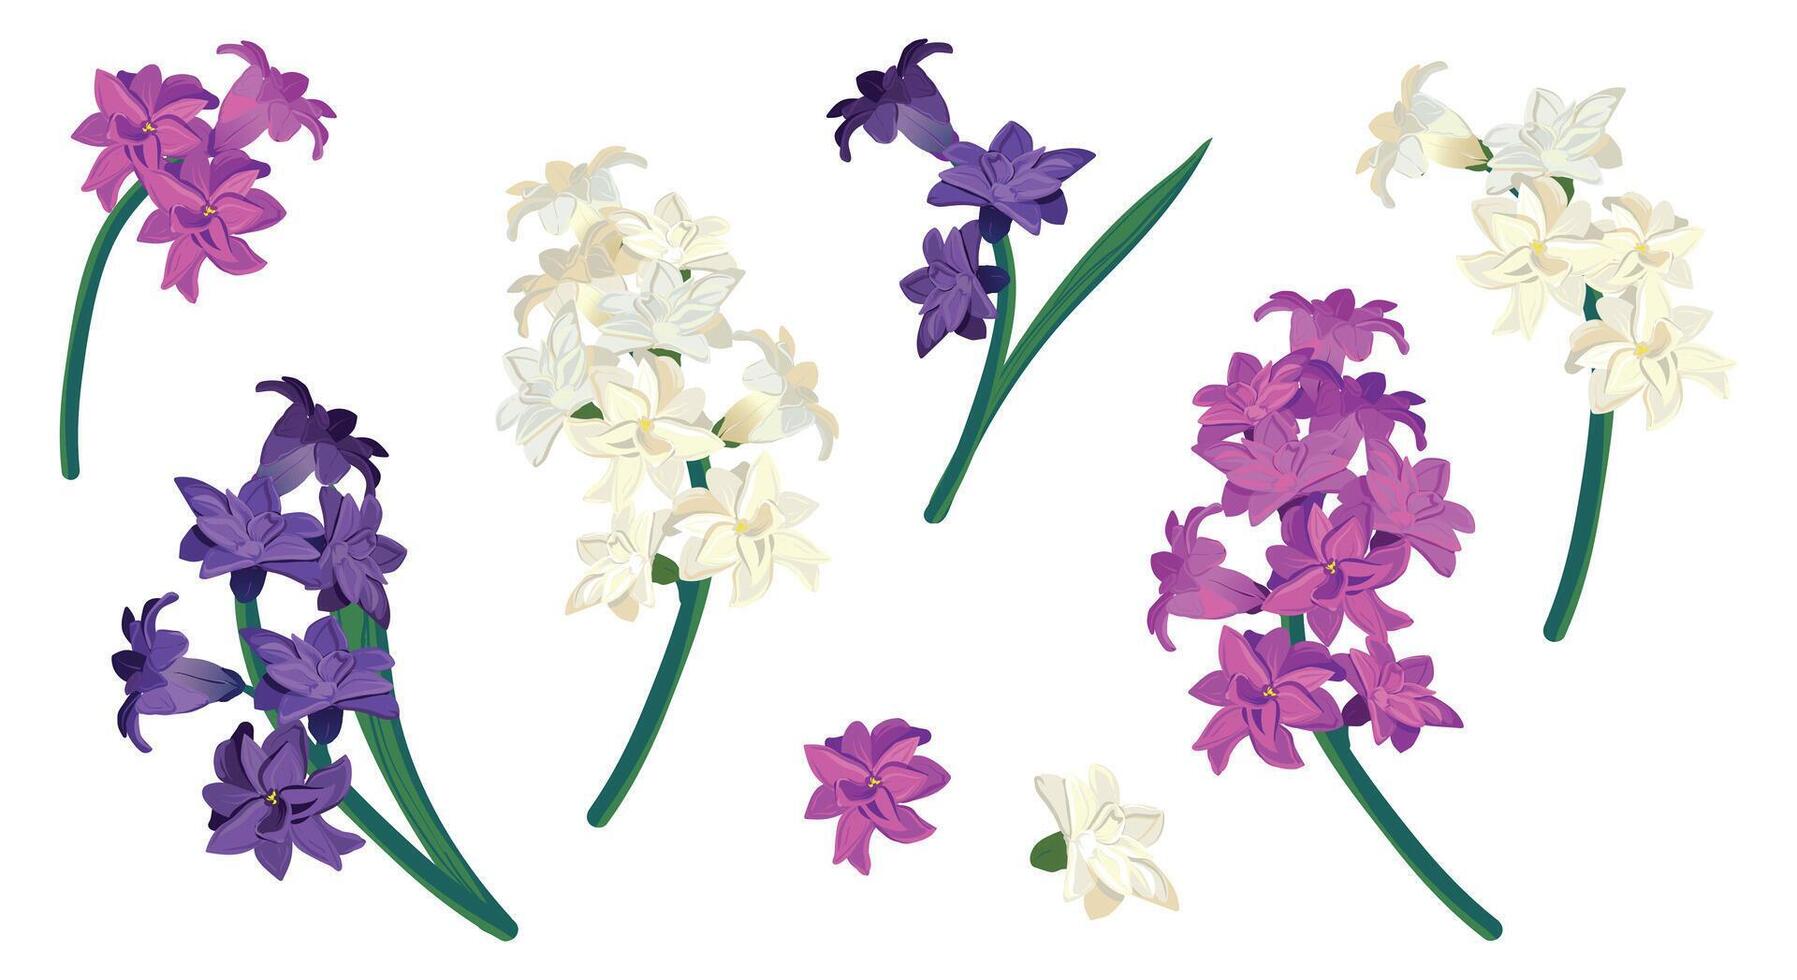 Set of hyacinth flowers isolated on white background. Vector caricature in cartoon style. Fragrant spring flowers, primroses of different colors, white-pink, violet, violet. Wedding flowers.